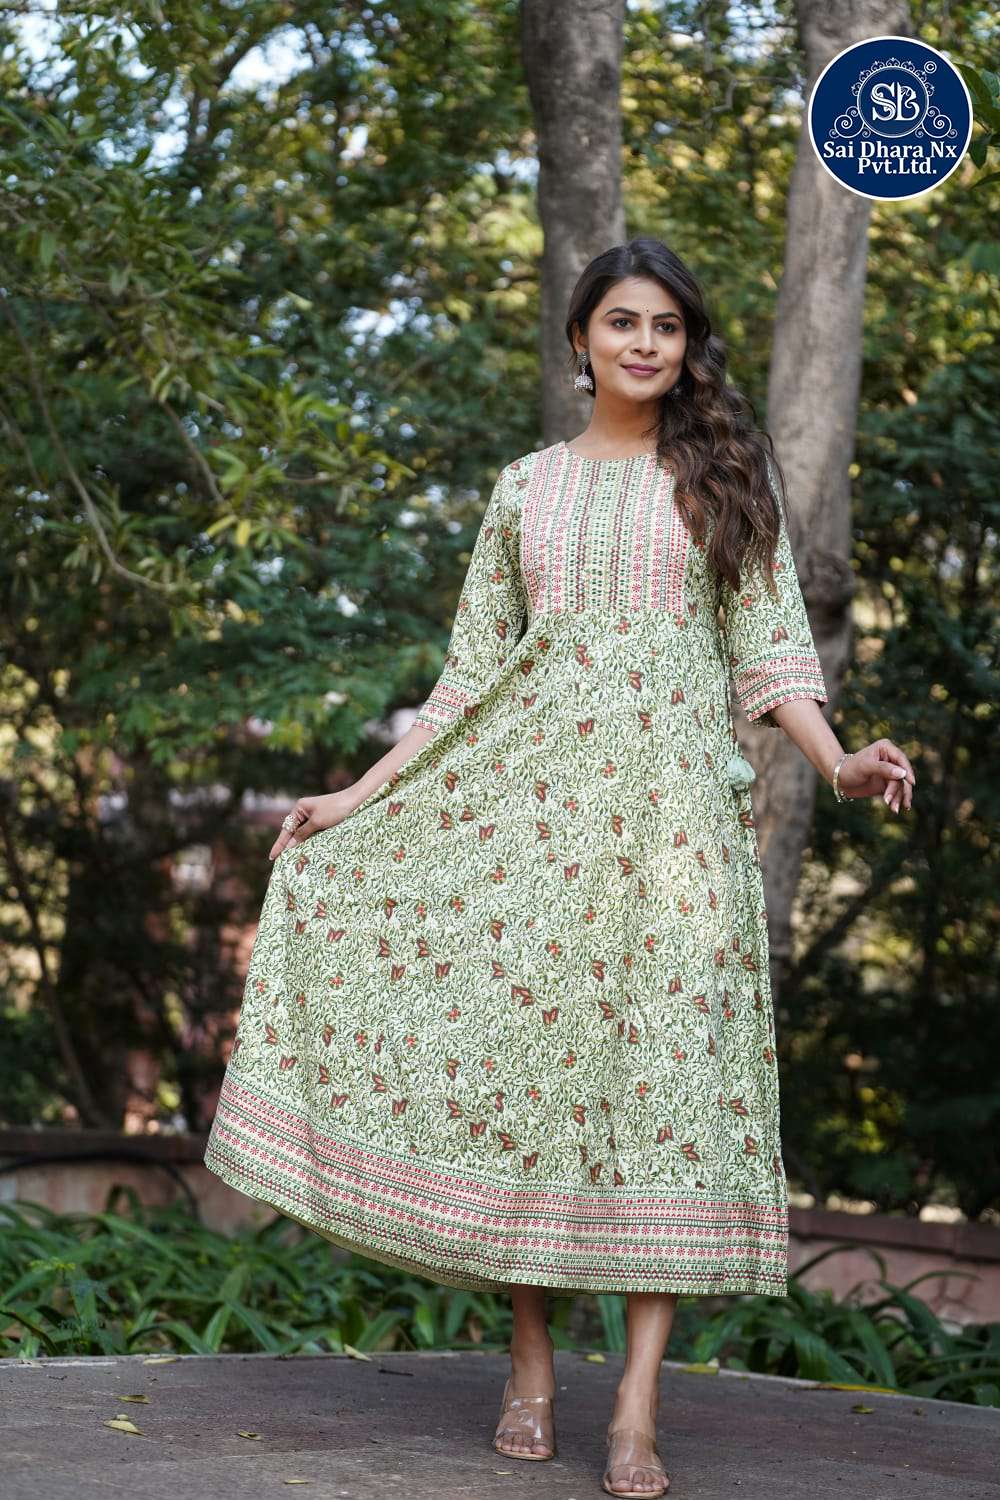 SAIDHARANX PRESENT LATEST ARRIVED REYON FABRIC BASED ANARKALI GOWN COLLECTION WHOLESALE SHOP IN SURAT - SaiDharaNx